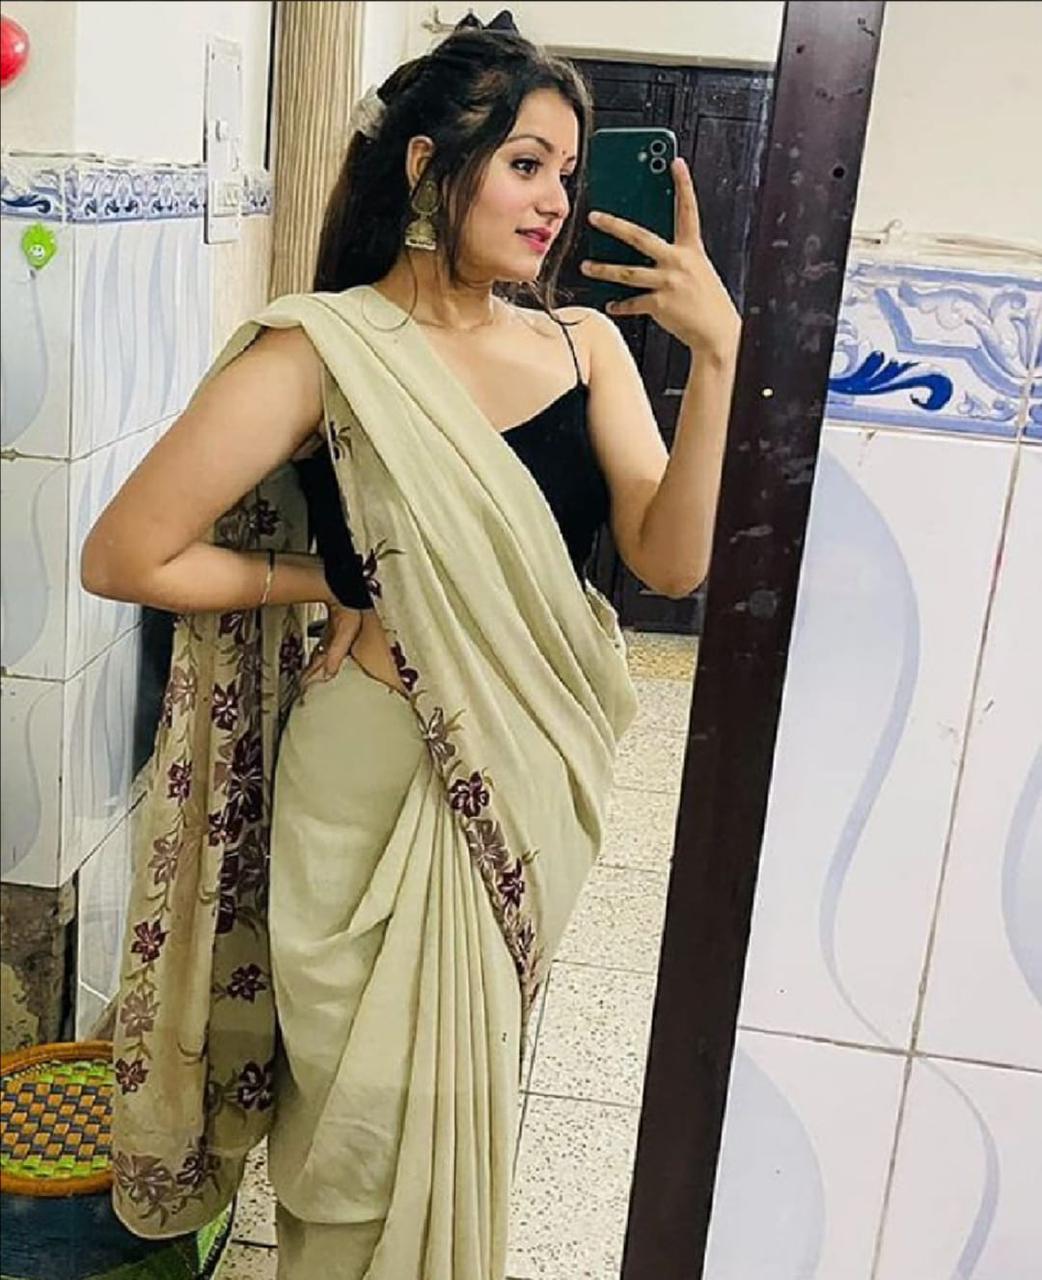 HADAPSAR🔥HOT&SEXY BEST CALL GIRL SAFE HOTEL&HOME AVAILABLE